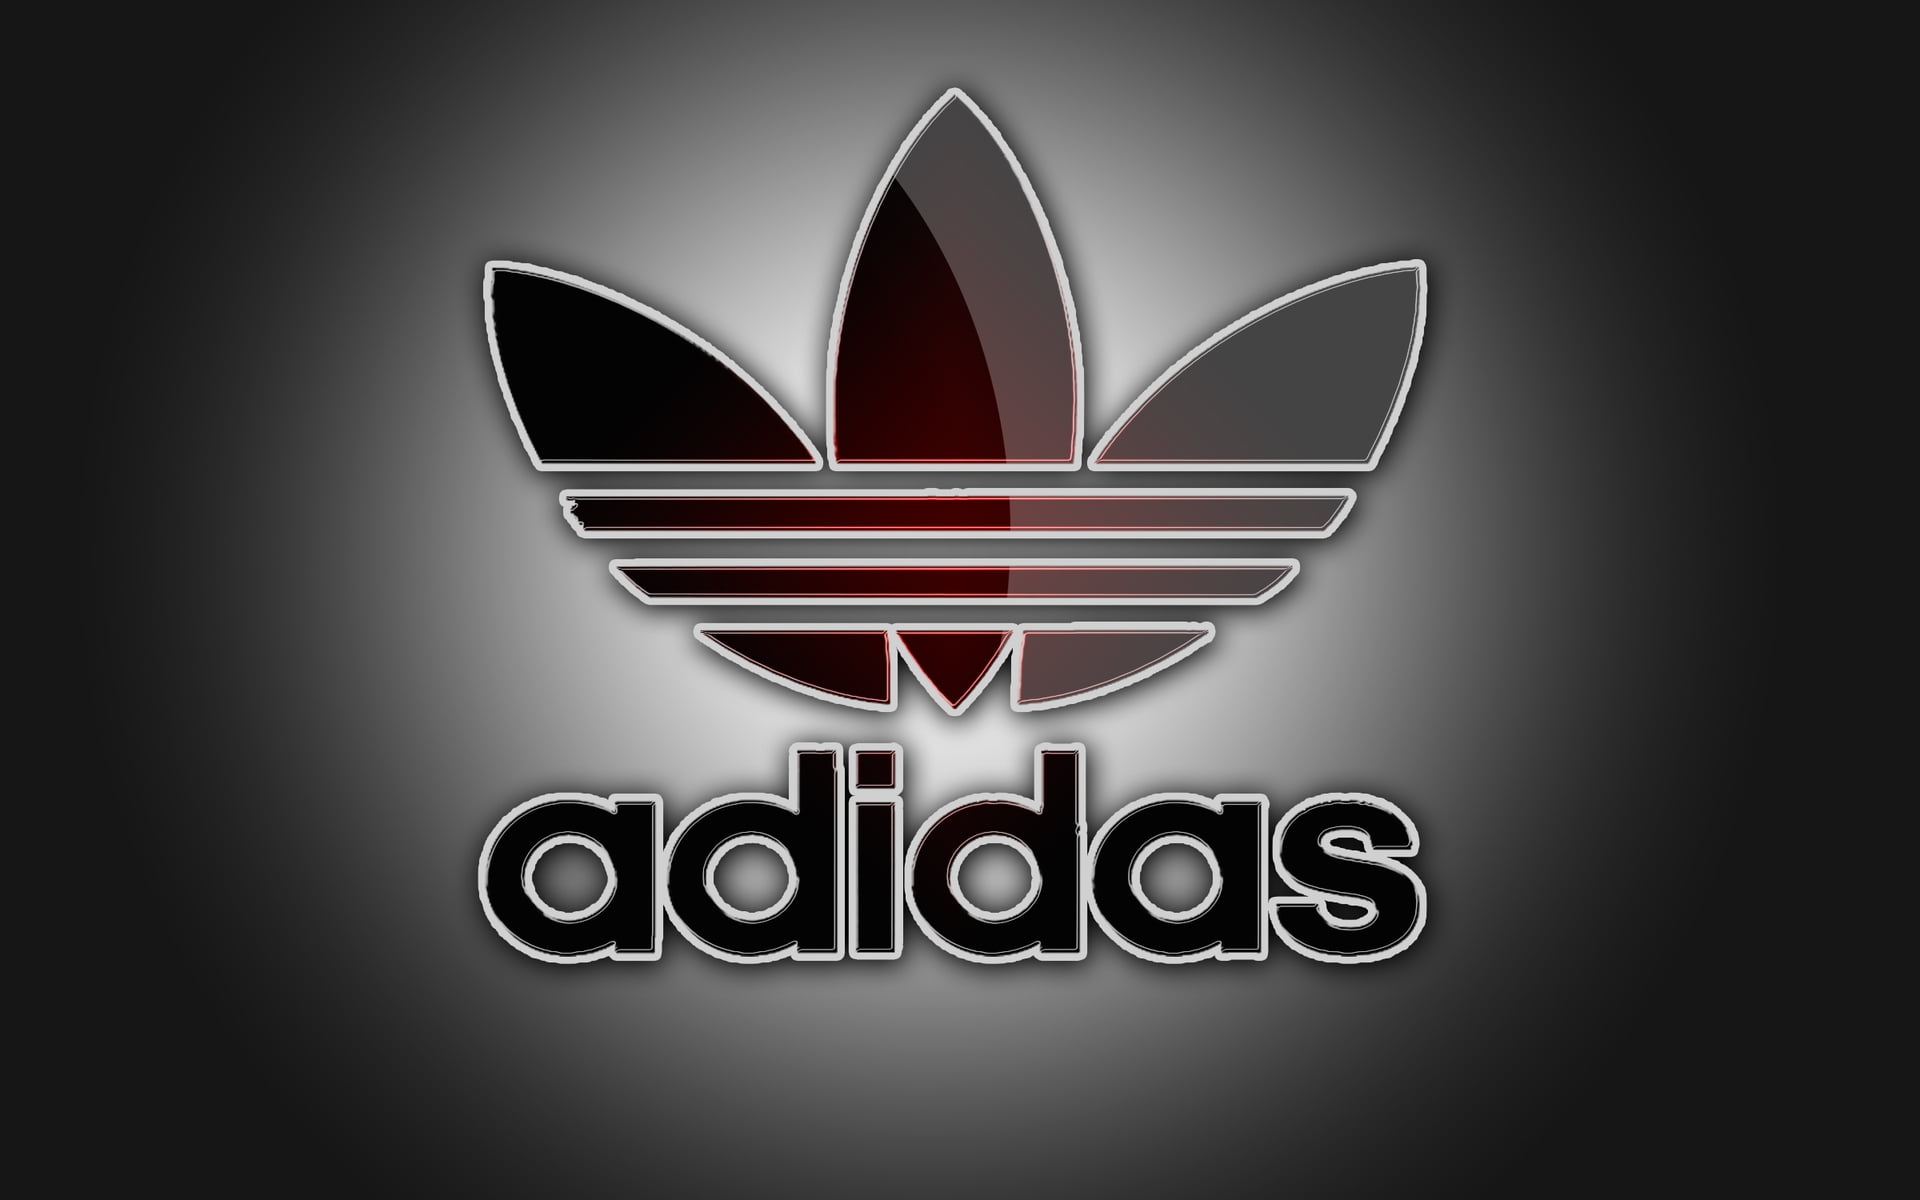 interview insect Gezond White Adidas clover logo HD wallpaper | Wallpaper Flare